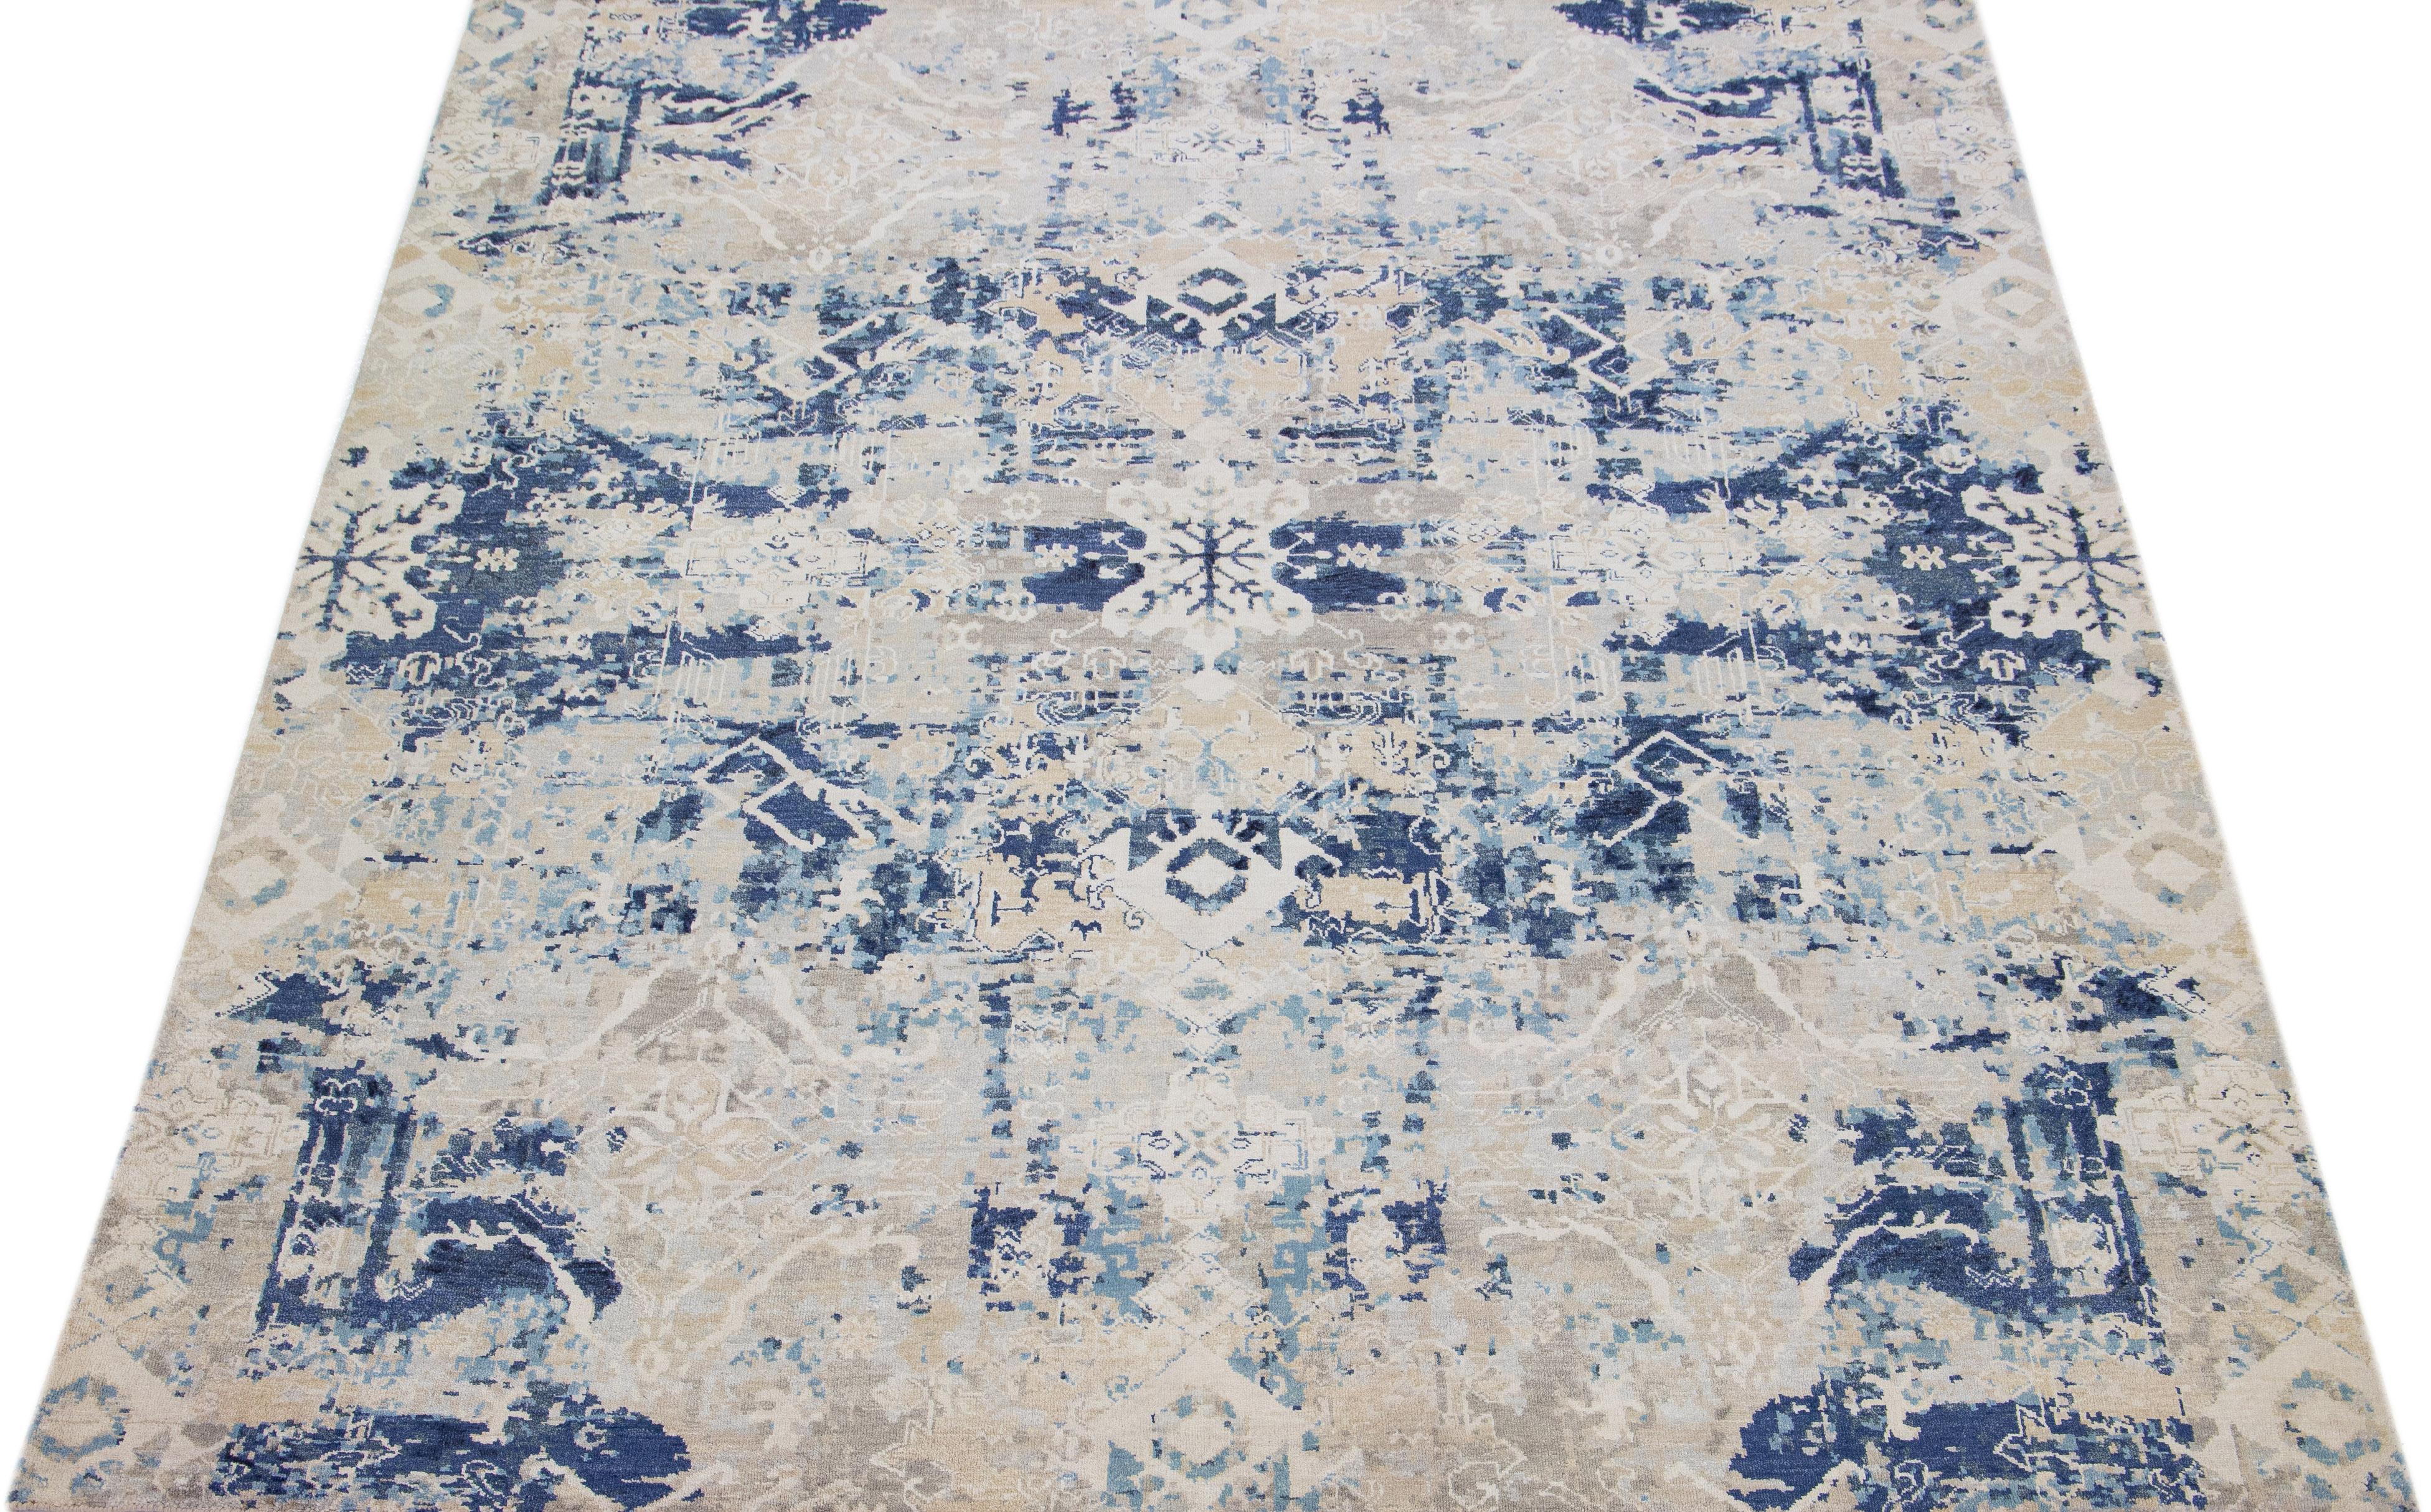 This rug features a combination of Indian wool and silk and has a beige-colored field decorated with a navy blue abstract pattern.

This rug measures 7'10